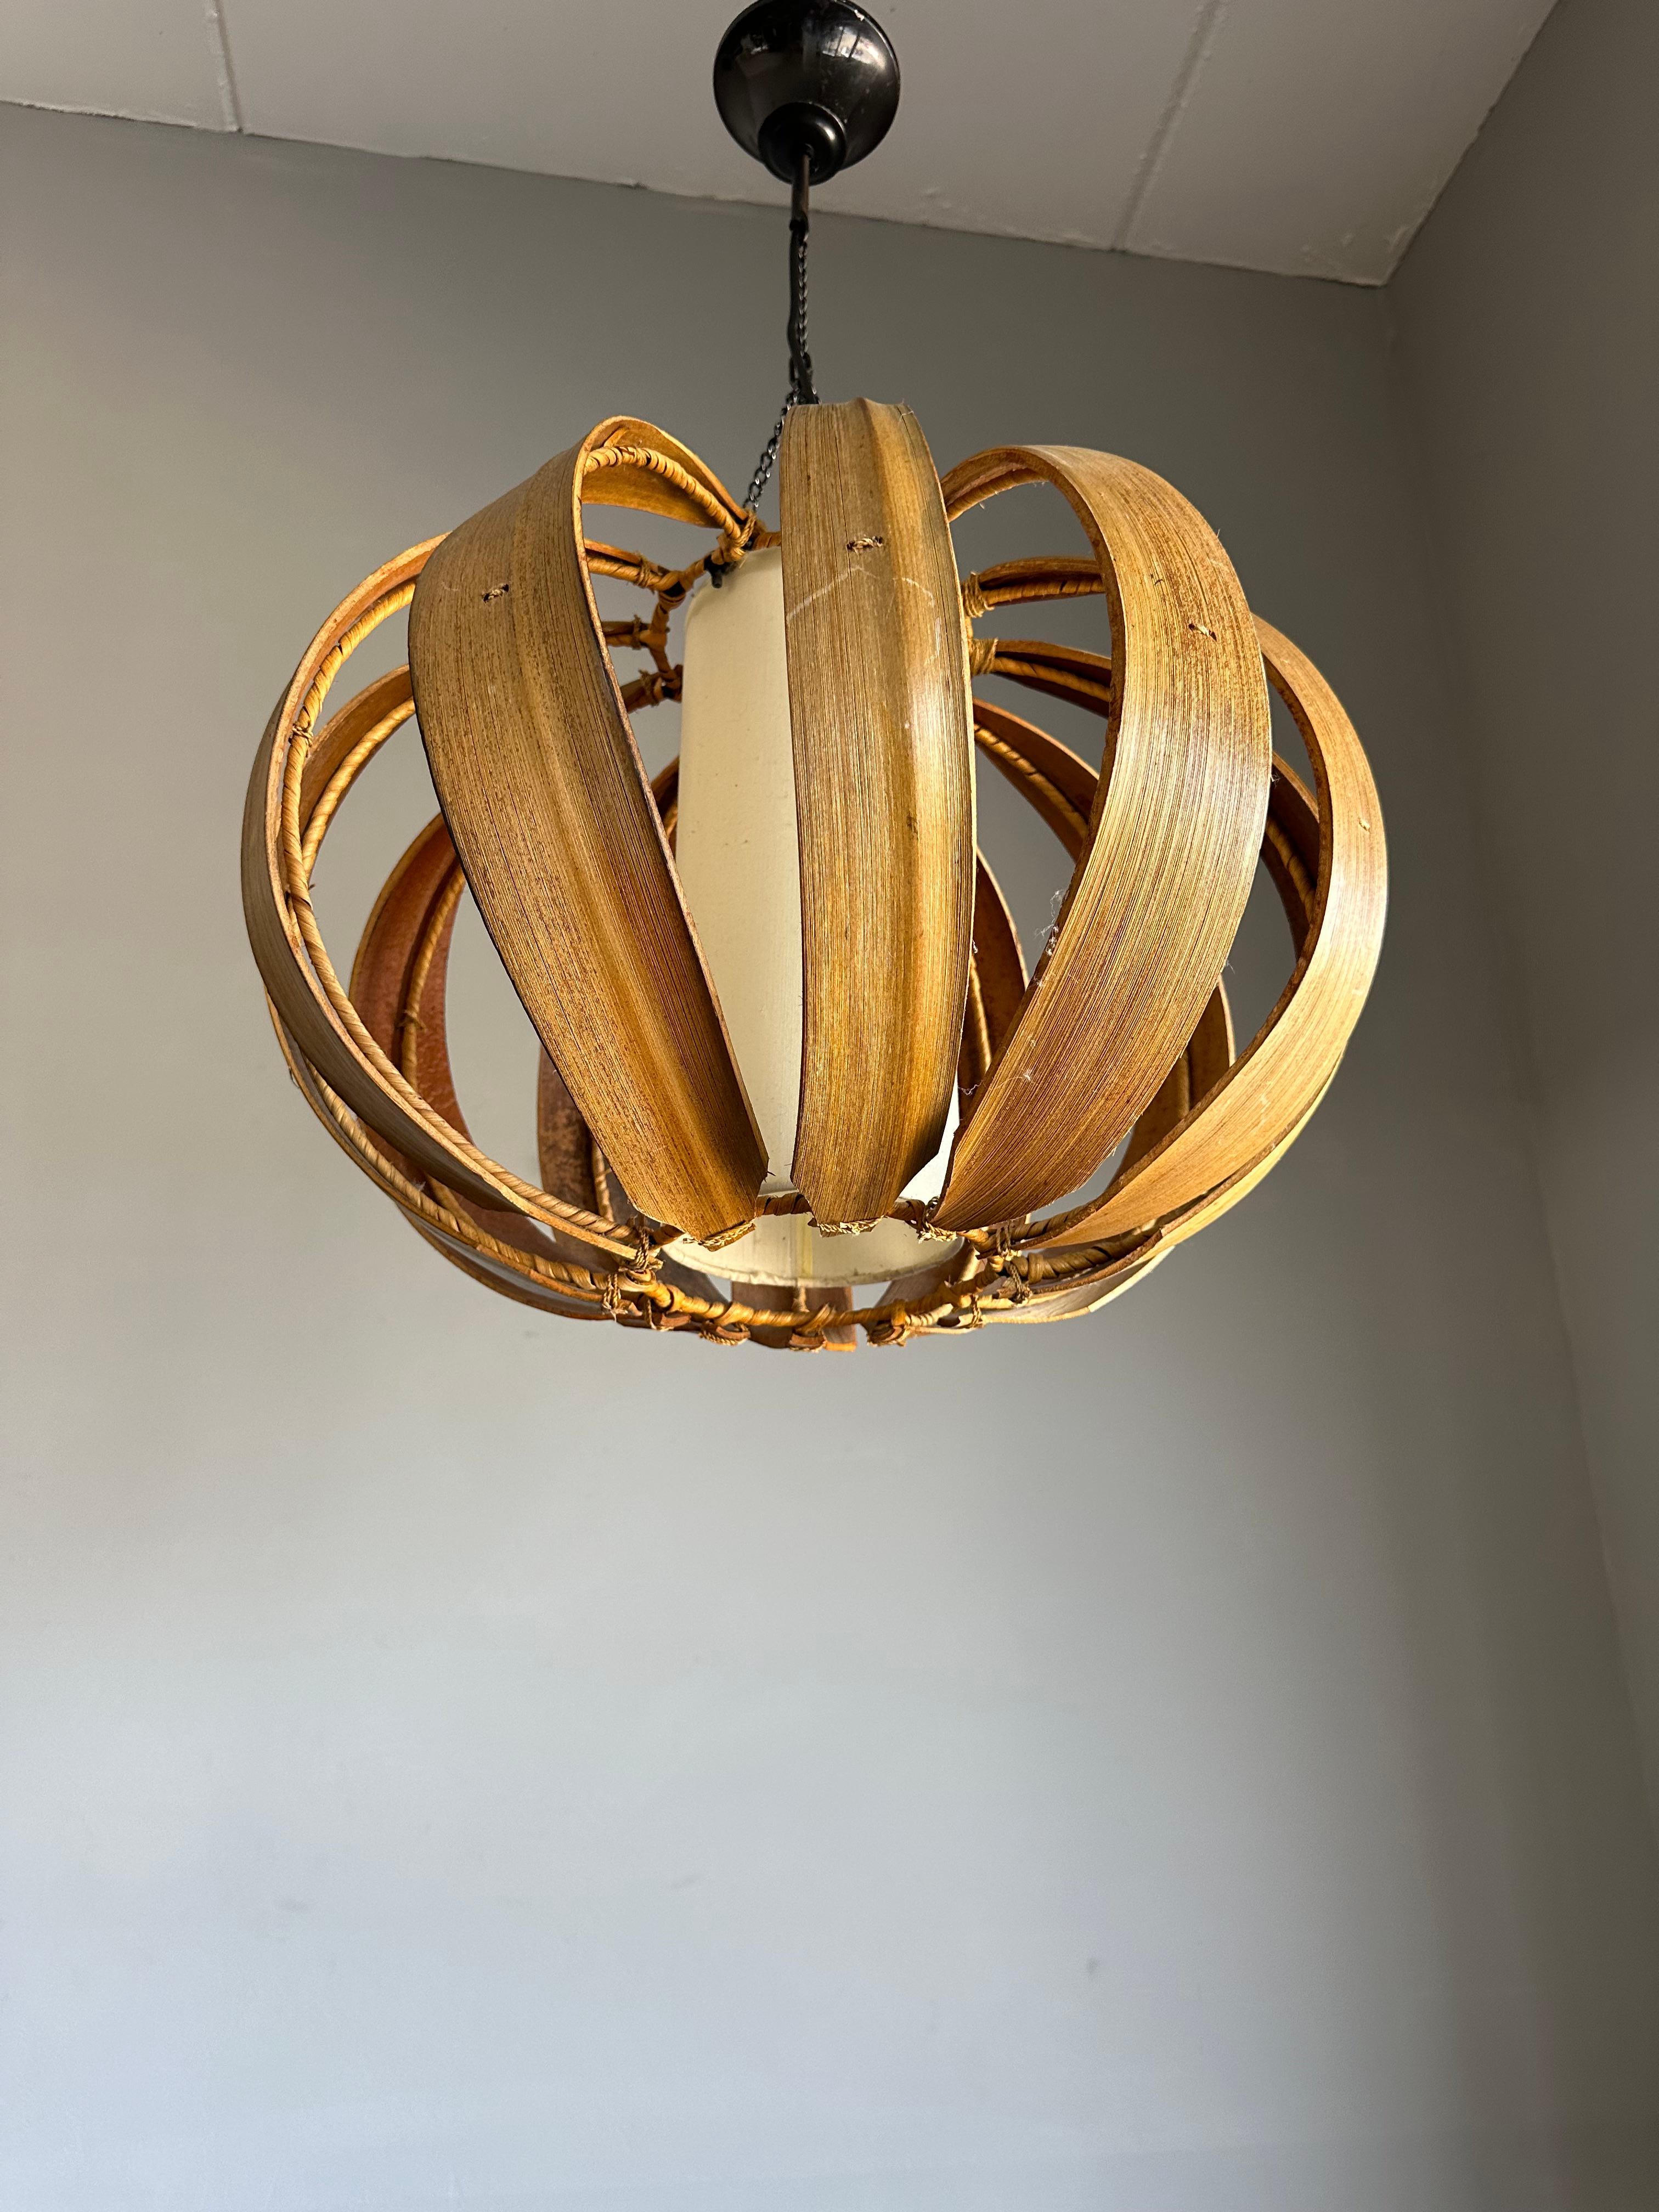 European Handcrafted Mid-Century Modern Coconut Leaf, Wicker and Shade Pendant Light For Sale